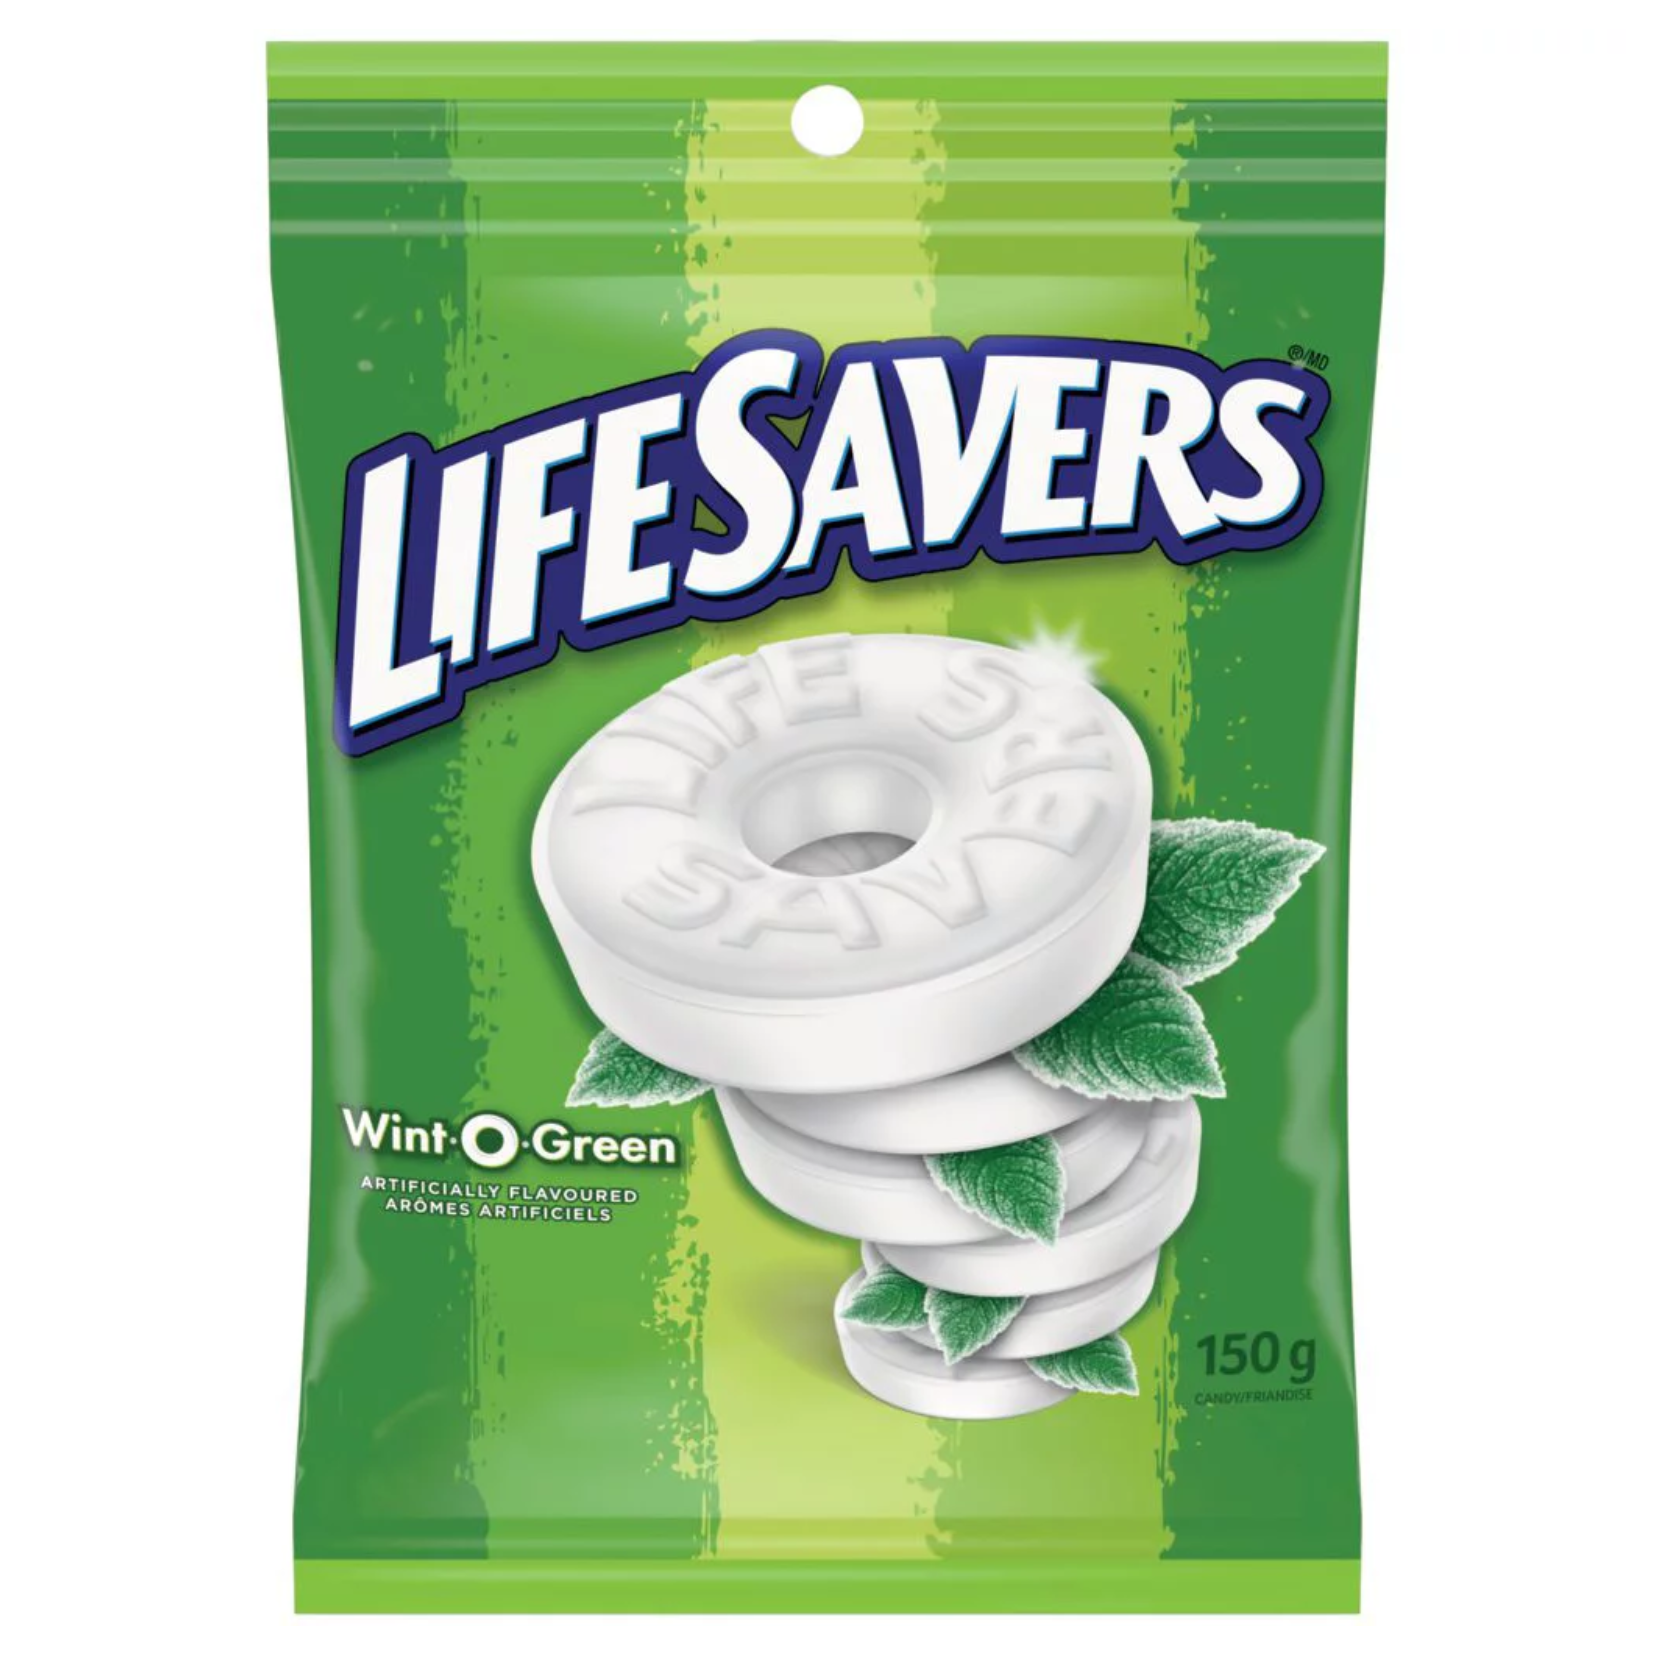 Life Savers Wint-O-Green Candy 150g